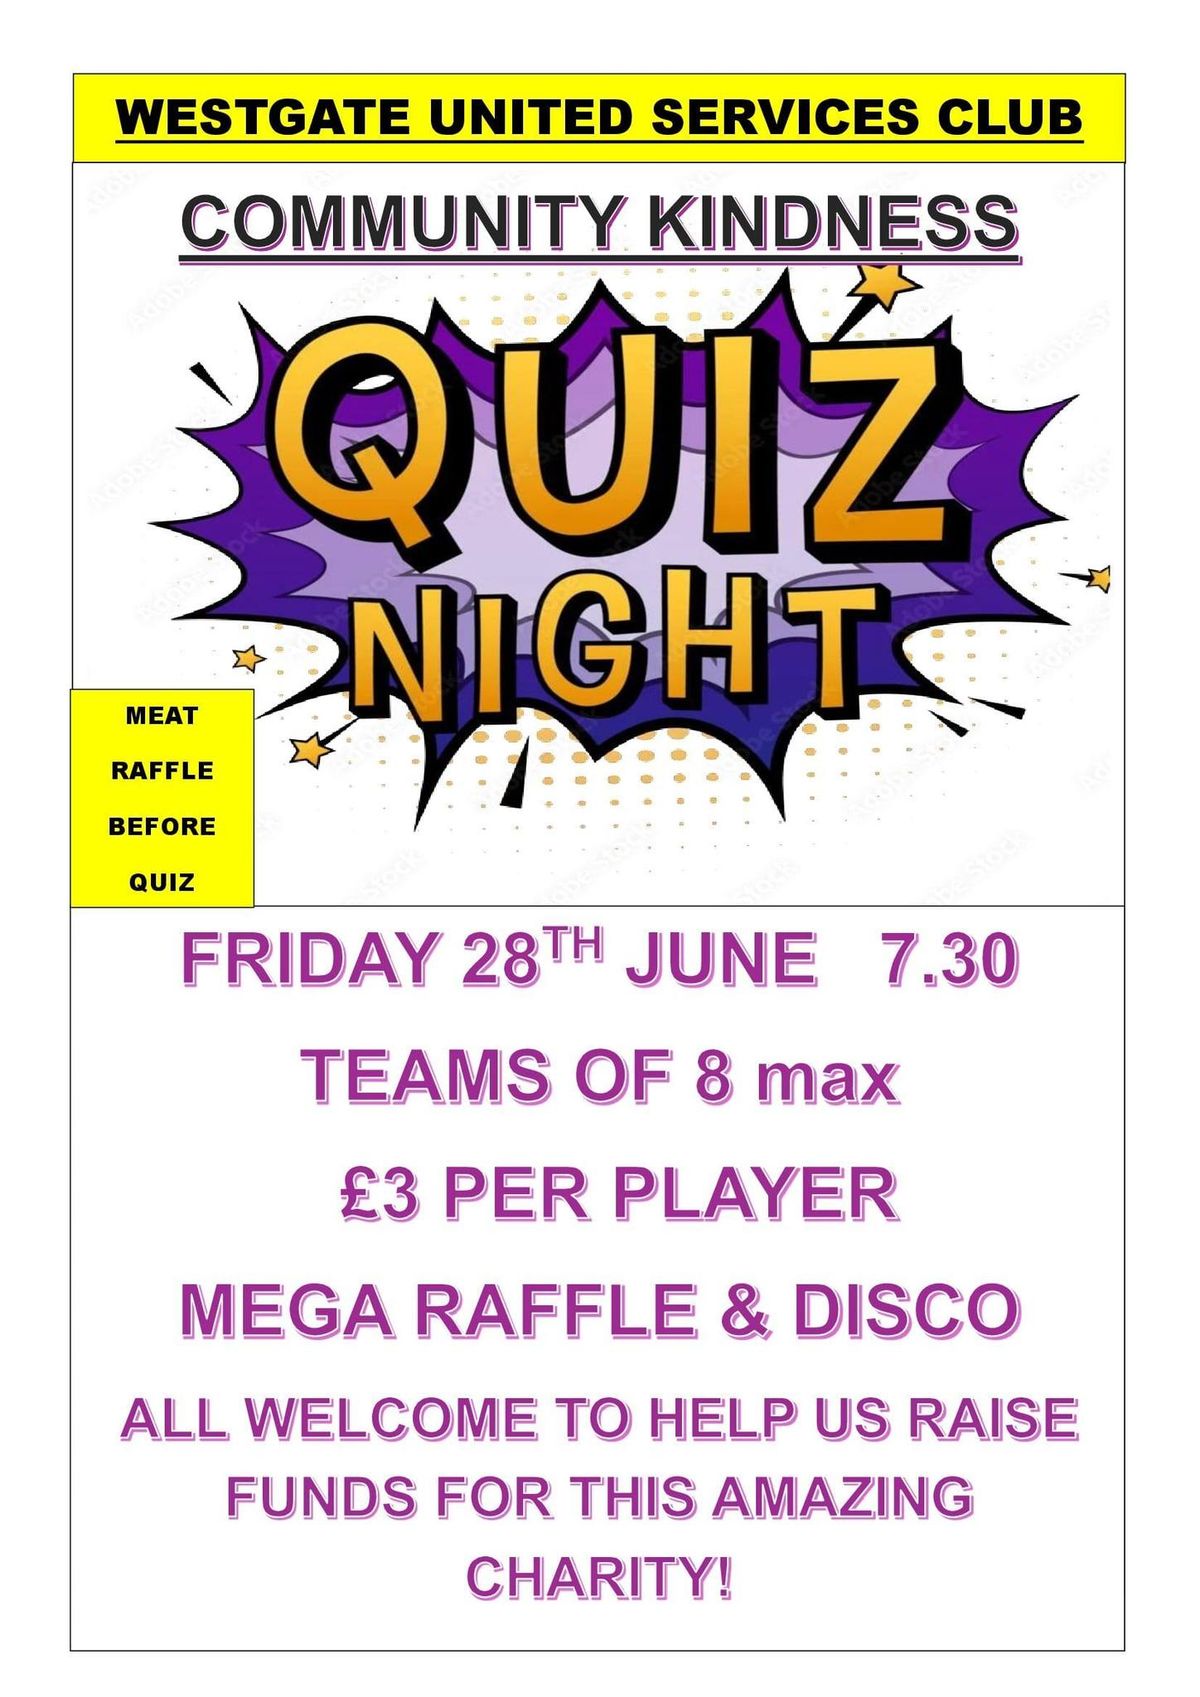 Charity Quiz Night & 50 PRIZE MEGA RAFFLE In Aid Of Community Kindness Thanet Charity